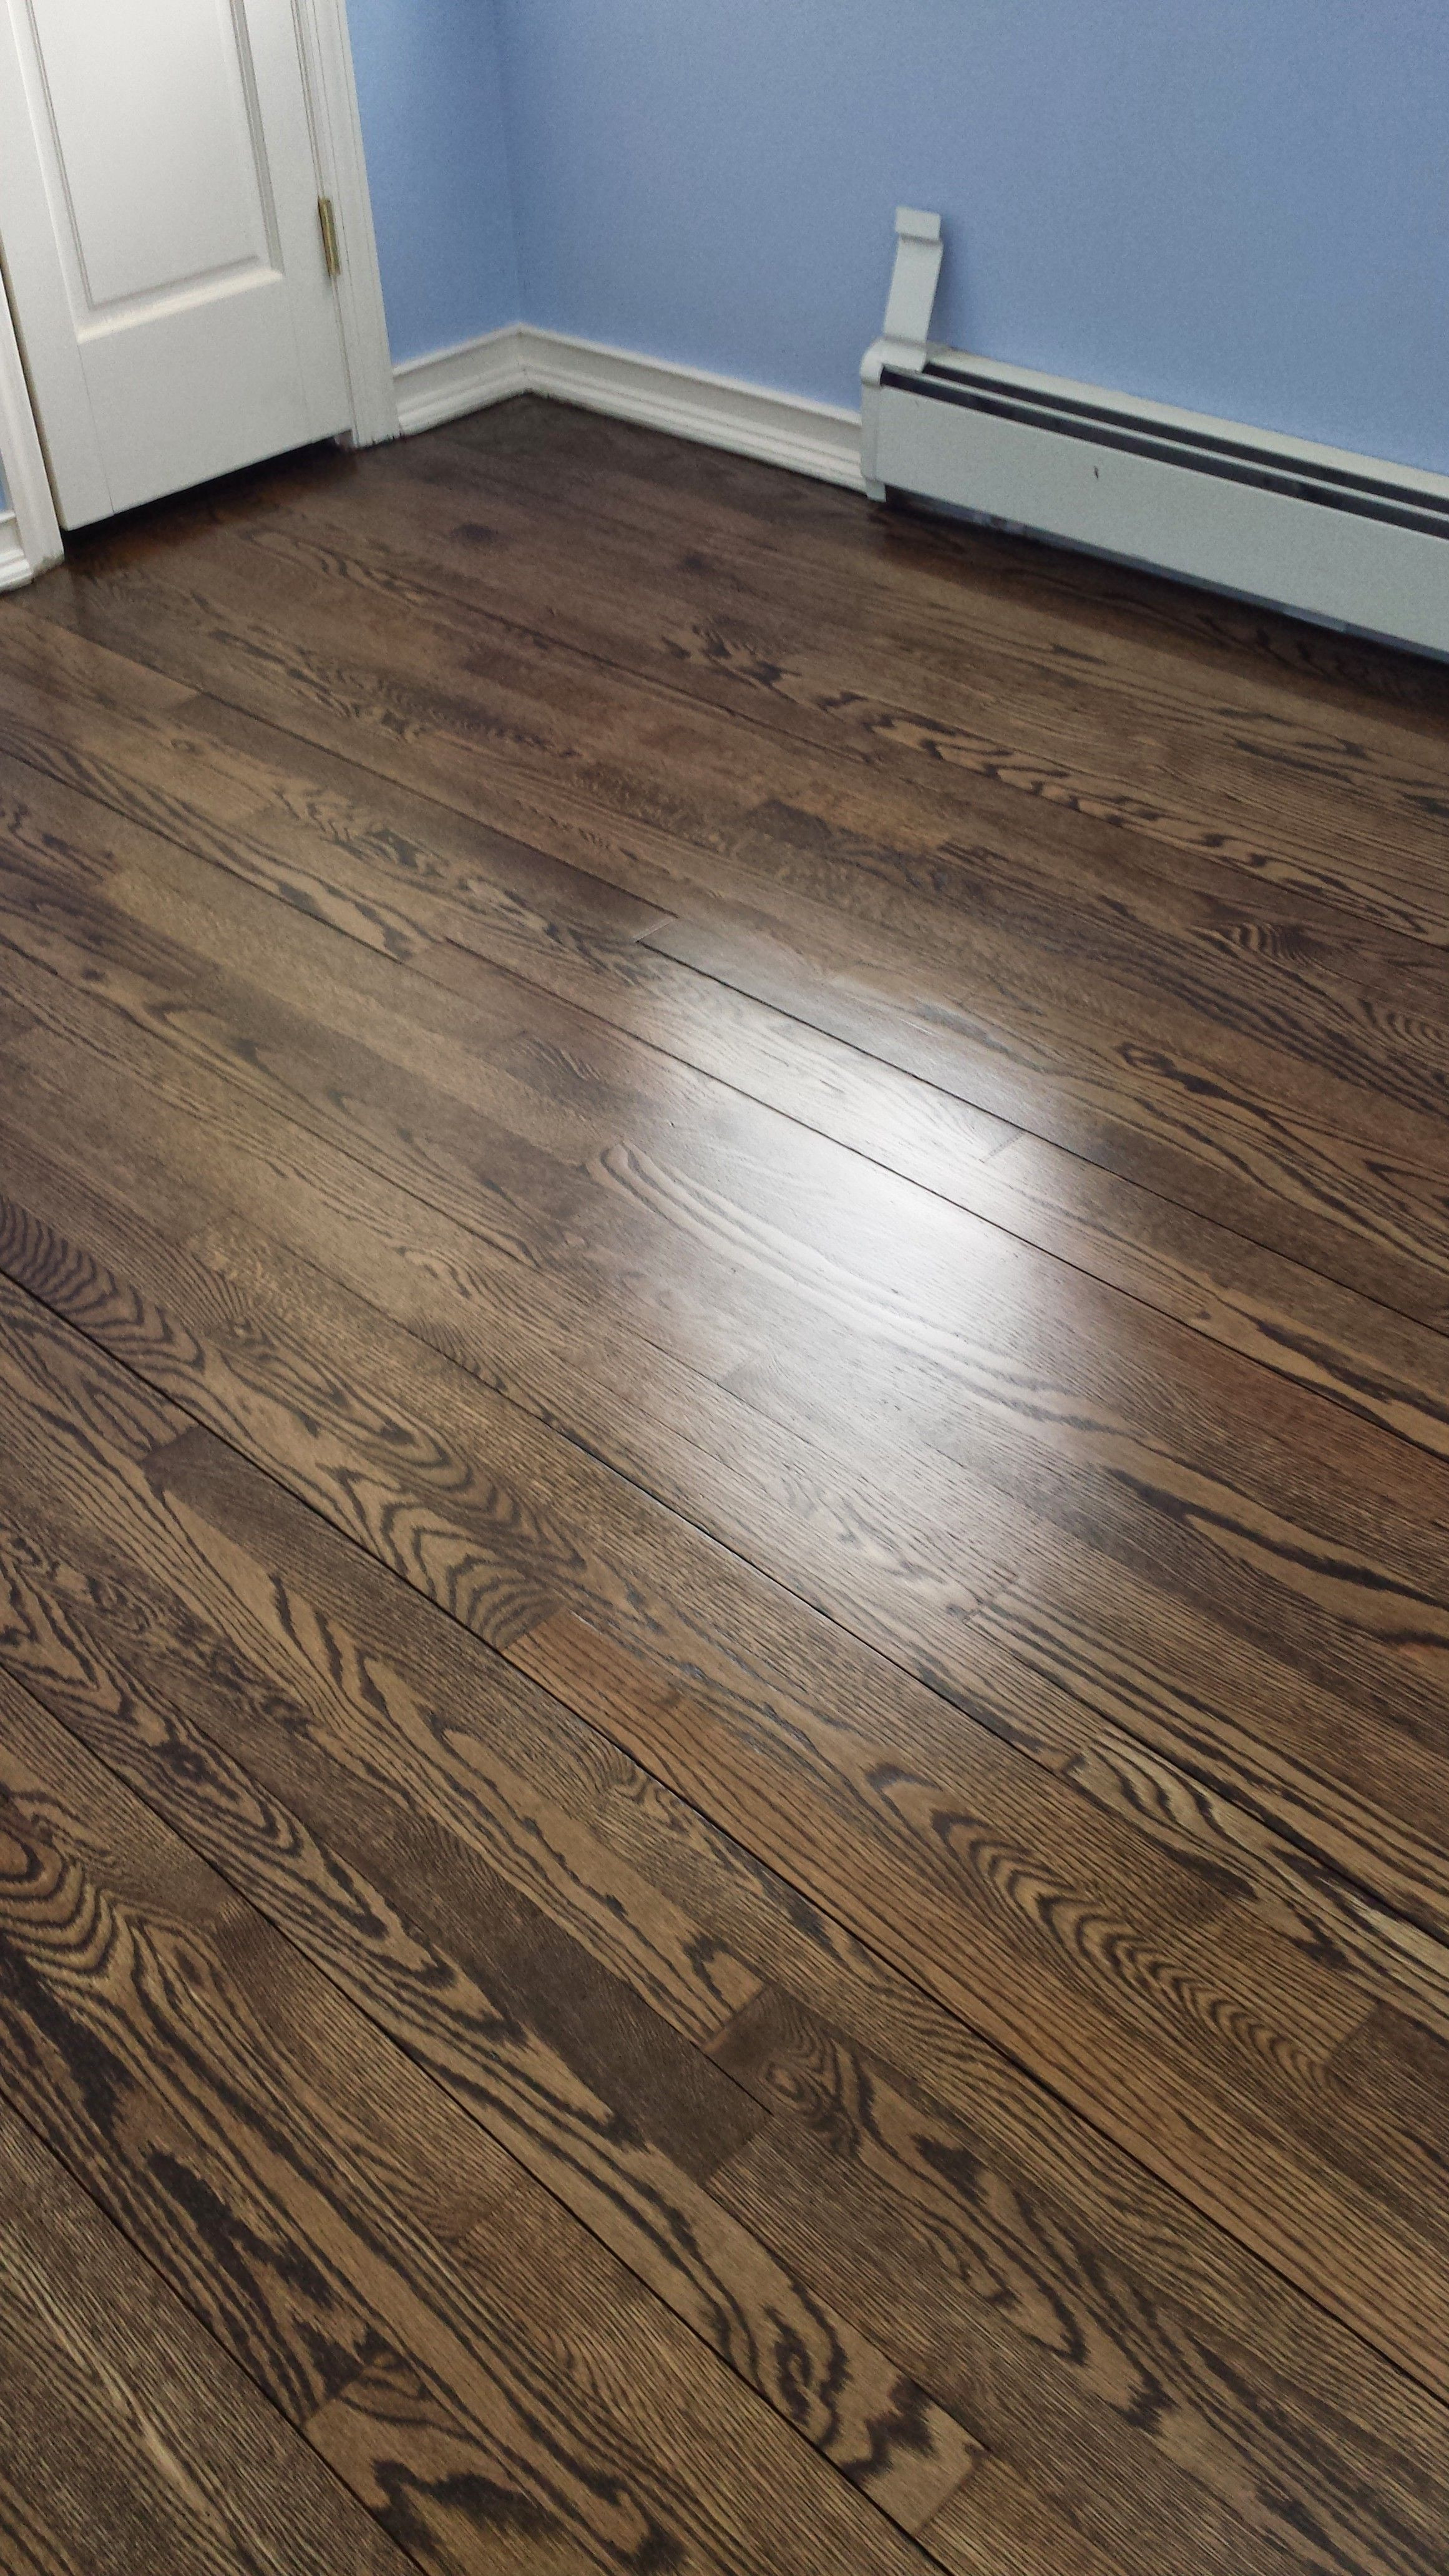 28 Fashionable Hardwood Floor Refinishing Companies Near Me 2024 free download hardwood floor refinishing companies near me of hardwood flooring prices floor plan ideas pertaining to hardwood floor refinishing is an affordable way to spruce up your space without a full